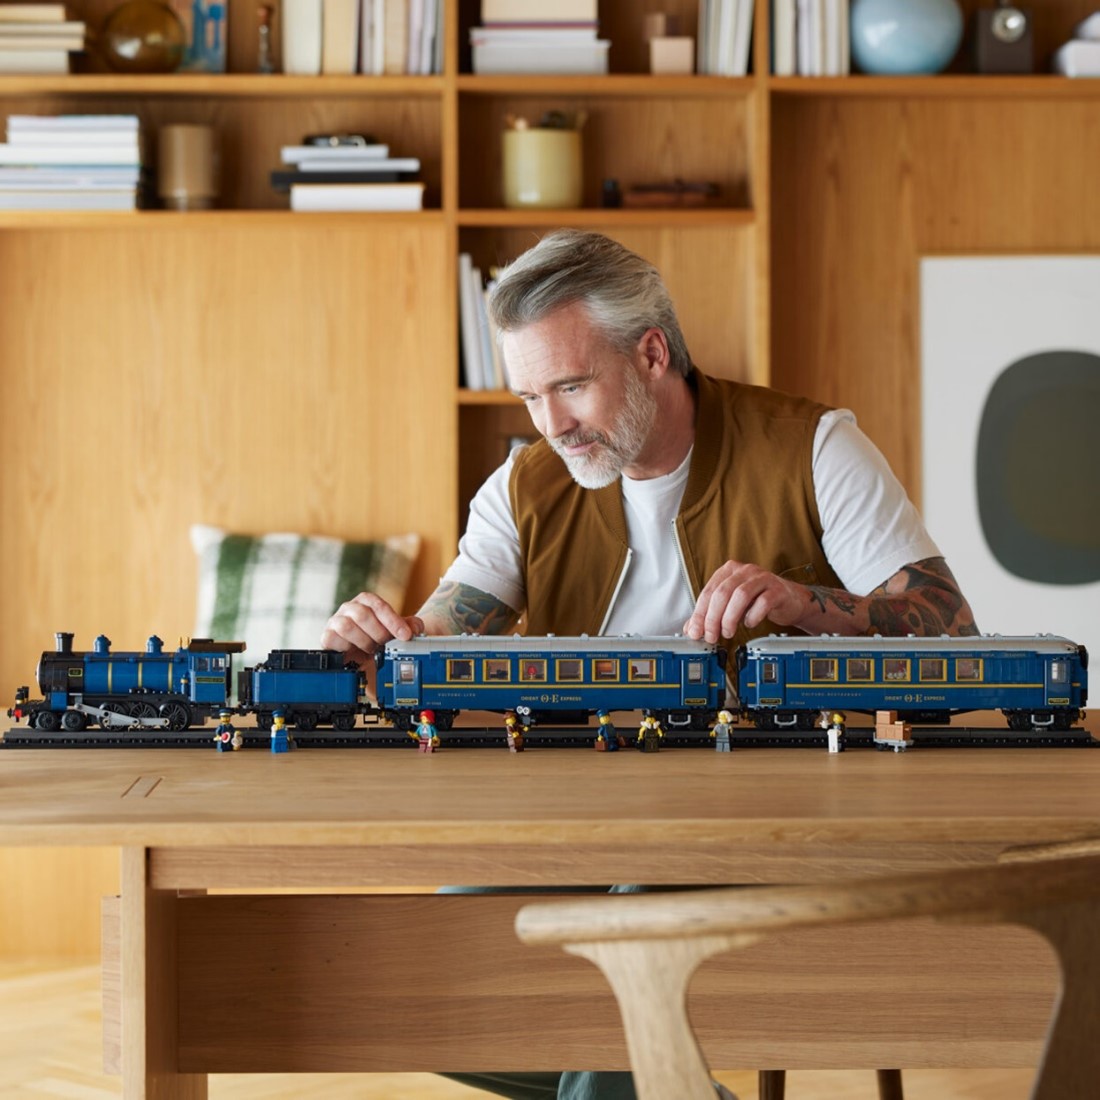 LEGO Orient Express can be motorized